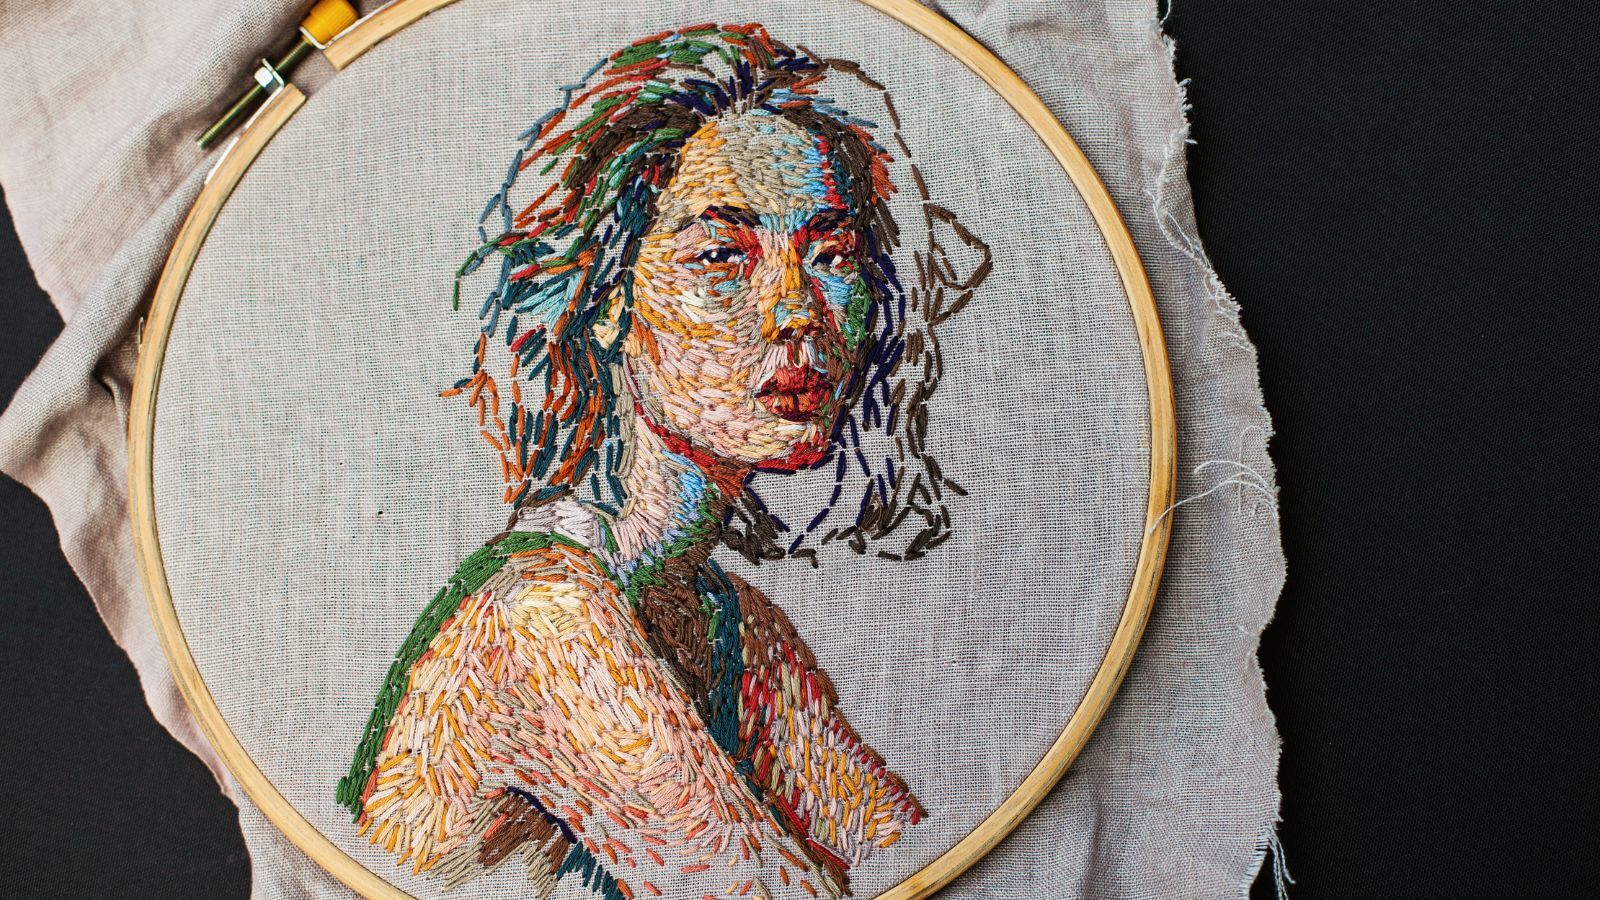 What to Do with Embroidery When It Finished?